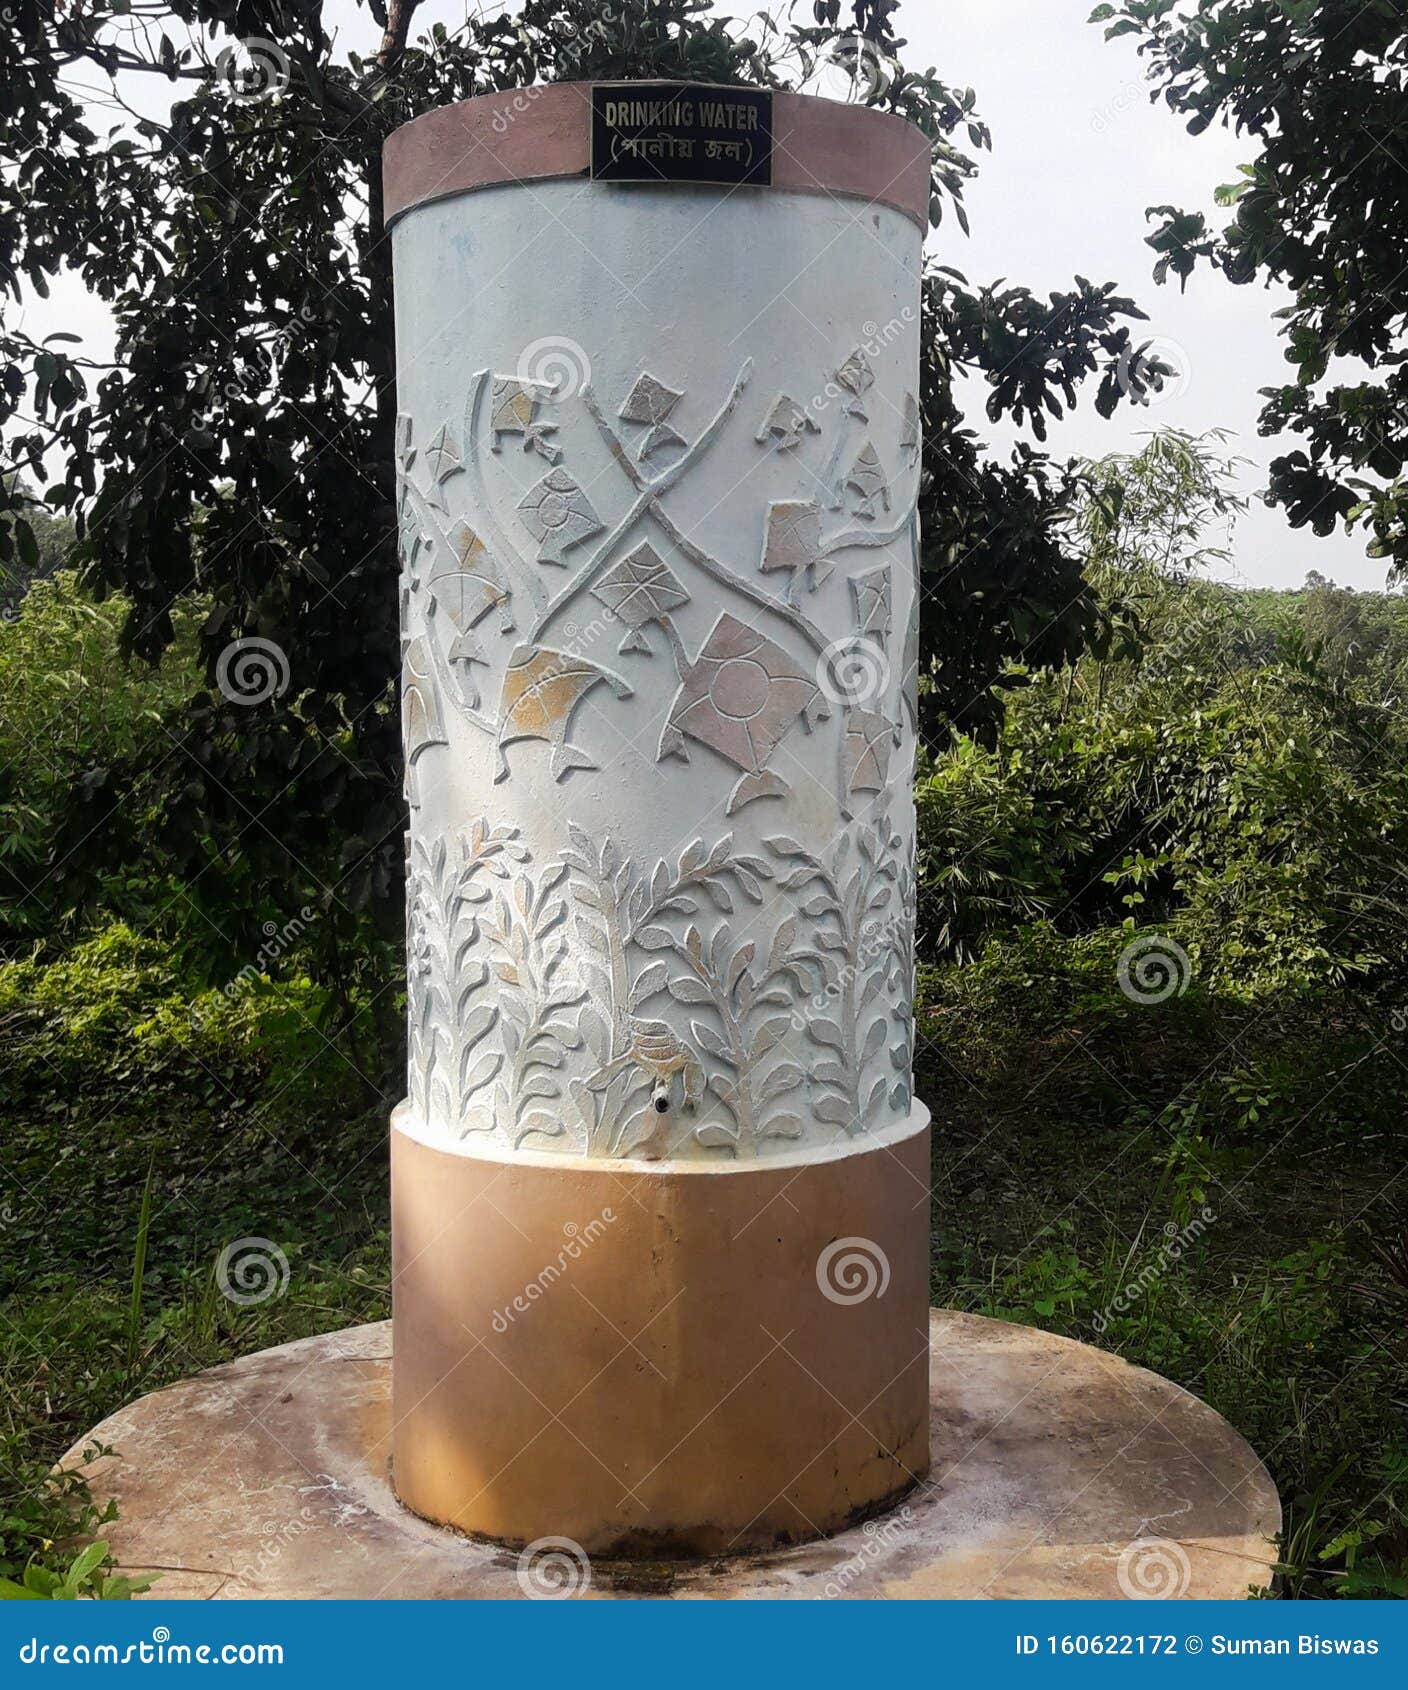 this is an image of water tank.